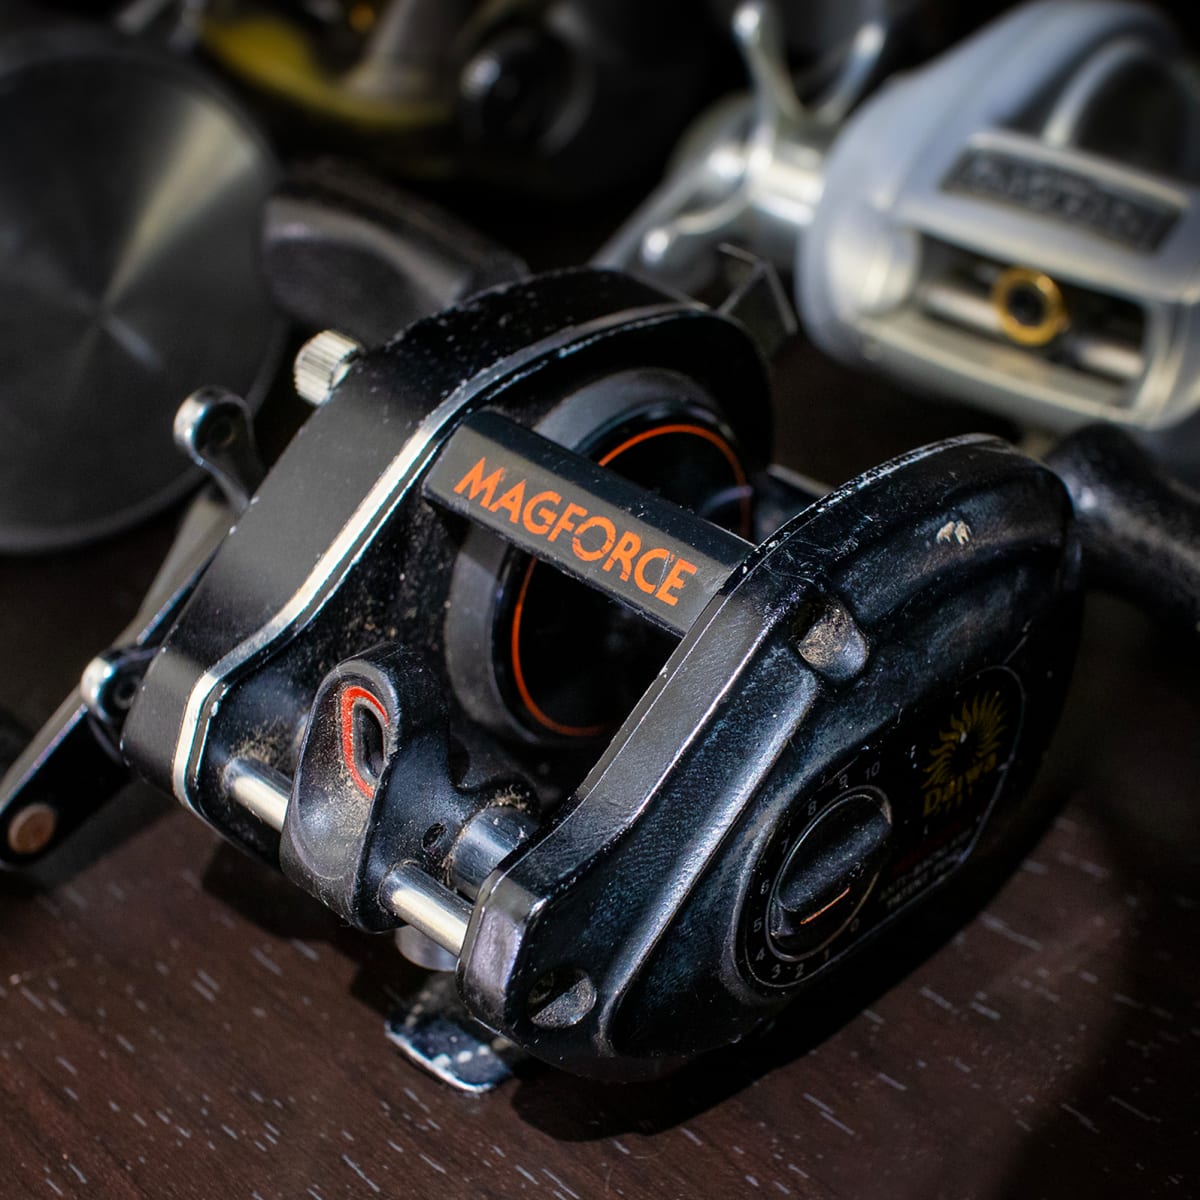 Is This 1981 Daiwa Reel Better Than Today's New Reels? - Men's Journal